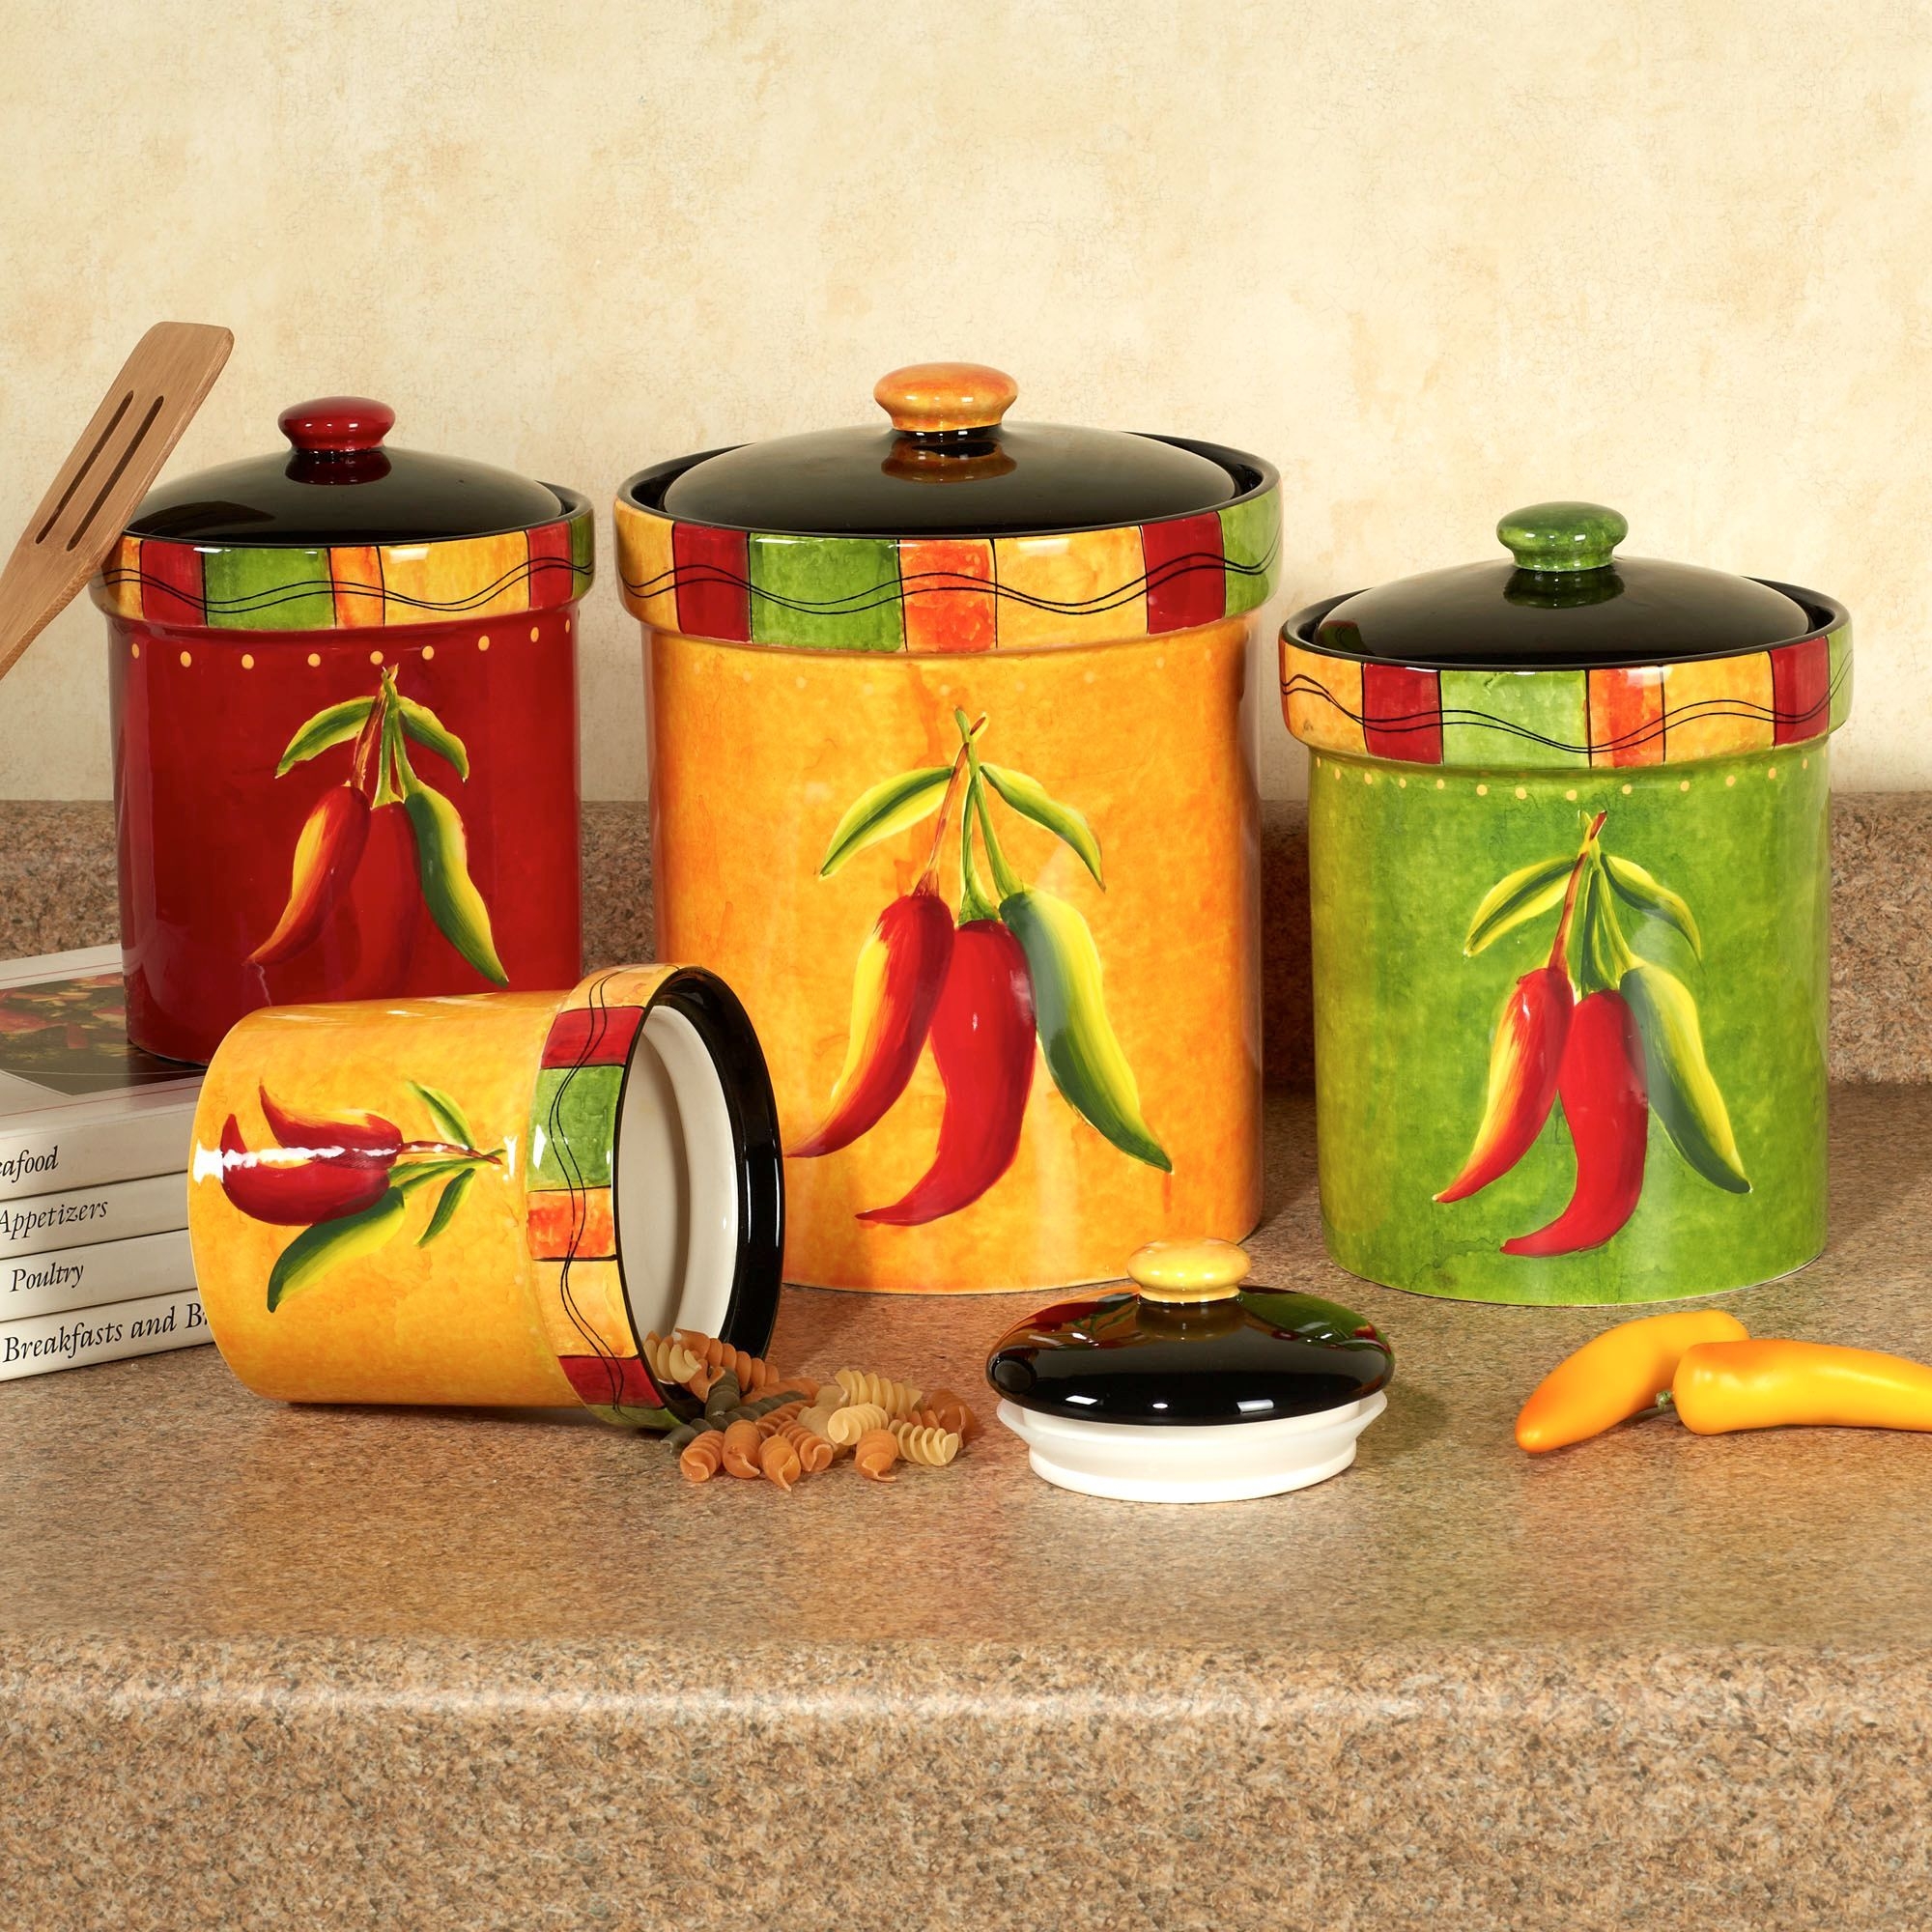 Contemporary kitchen canisters